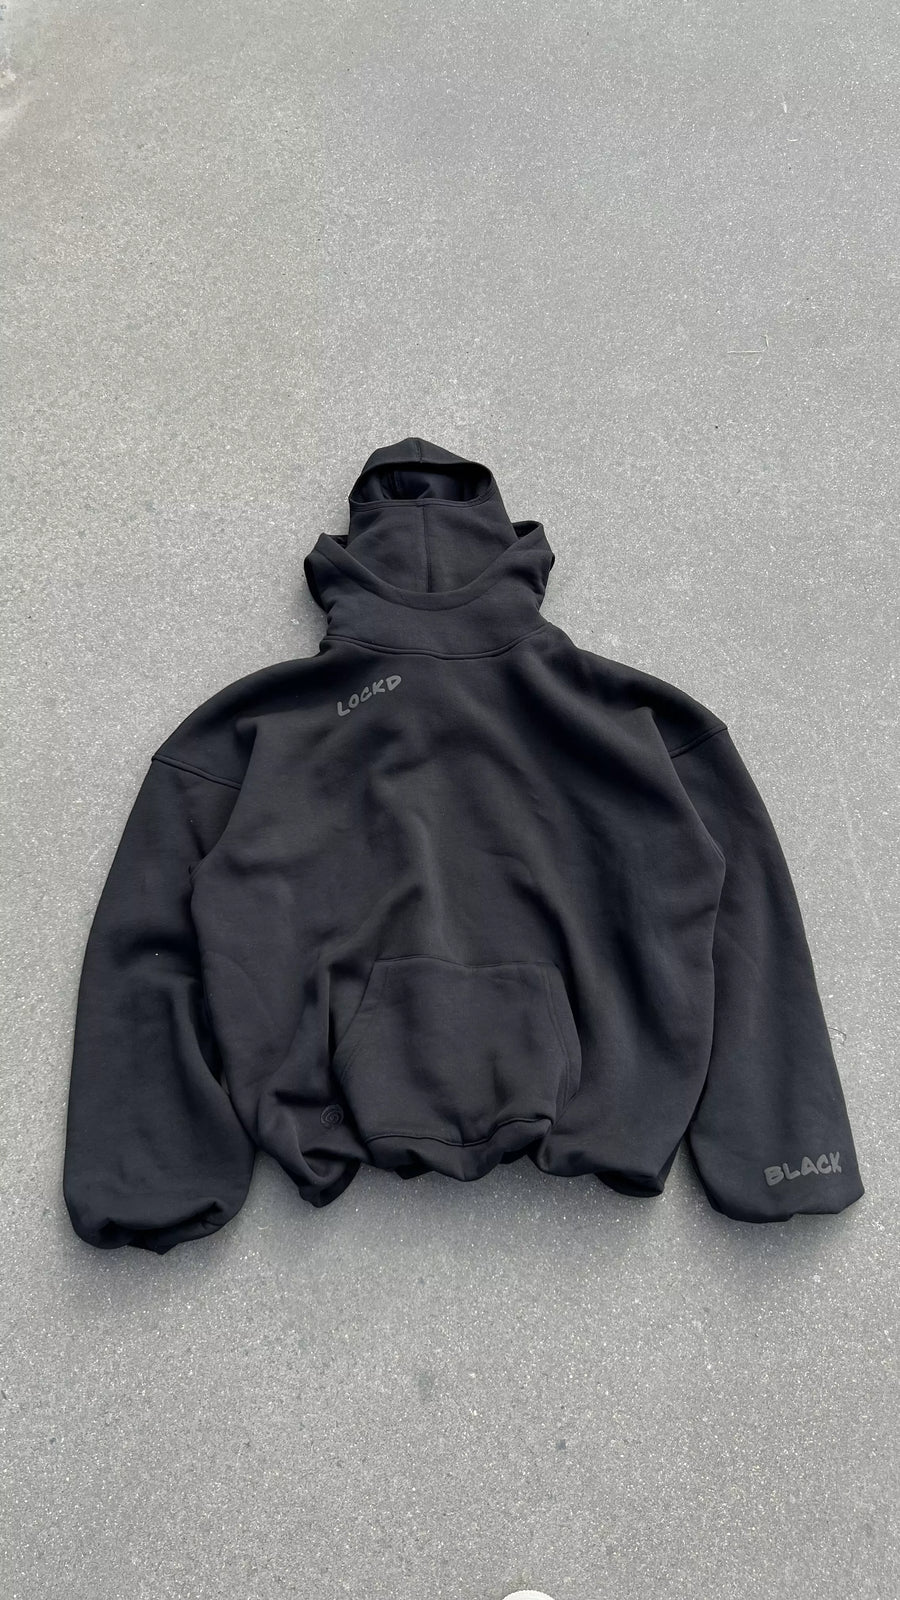 HOODIE CAGOULE BLACK ULTRA OVERISZE